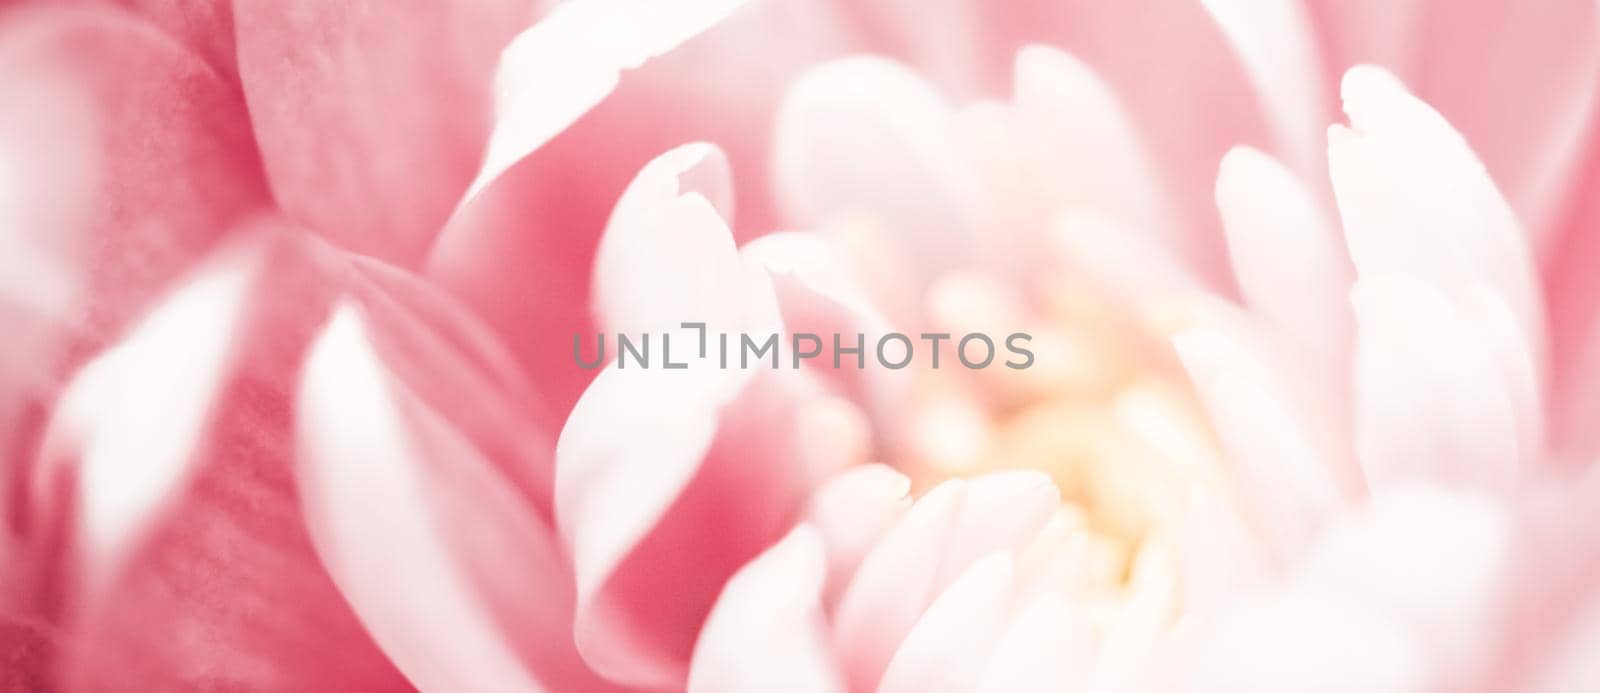 Flora, branding and love concept - Pink daisy flower petals in bloom, abstract floral blossom art background, flowers in spring nature for perfume scent, wedding, luxury beauty brand holiday design